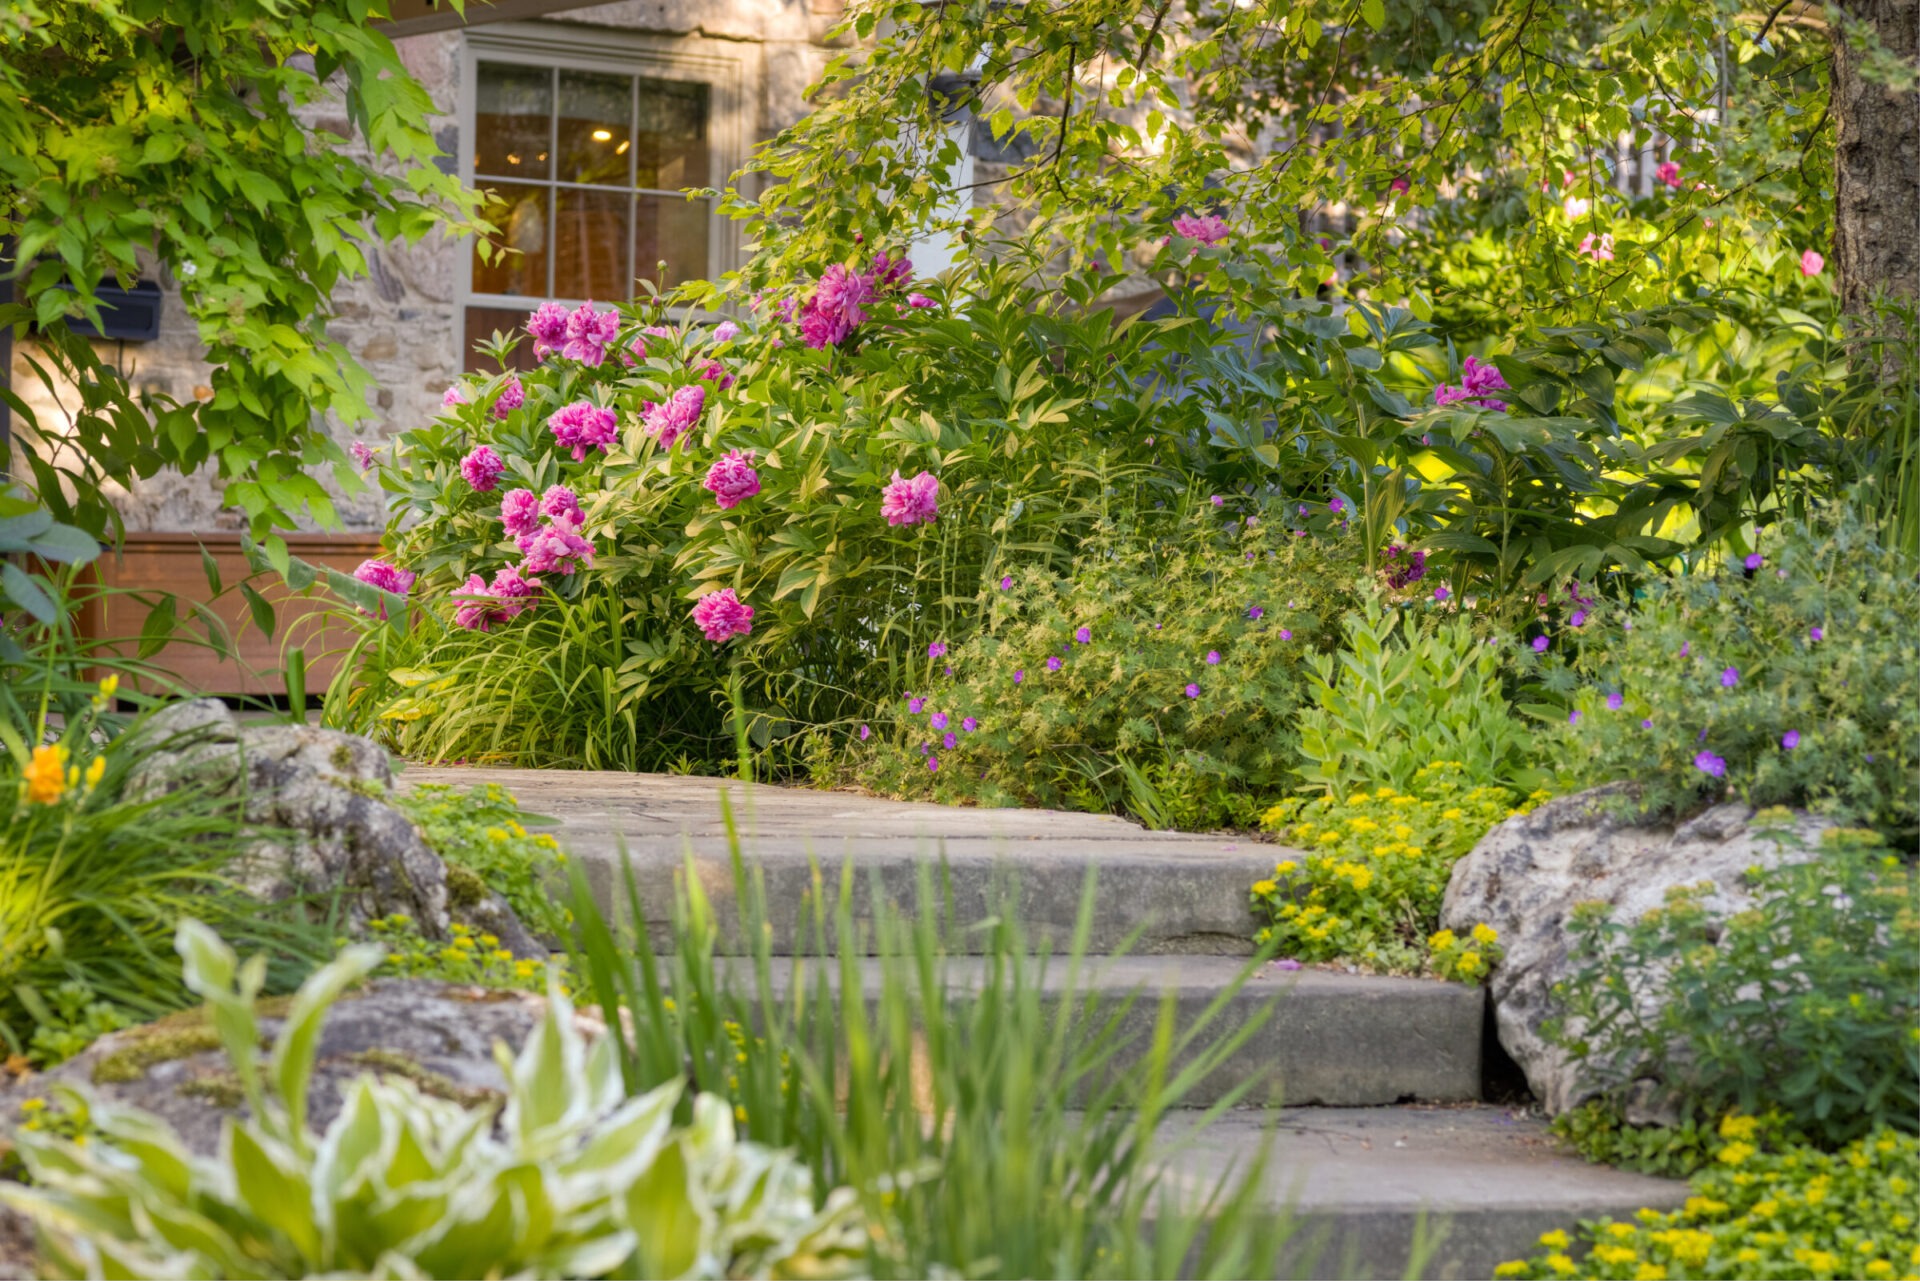 A tranquil garden with stone steps flanked by lush flowers in pink and yellow hues, green foliage, and a glimpse of a stone building.